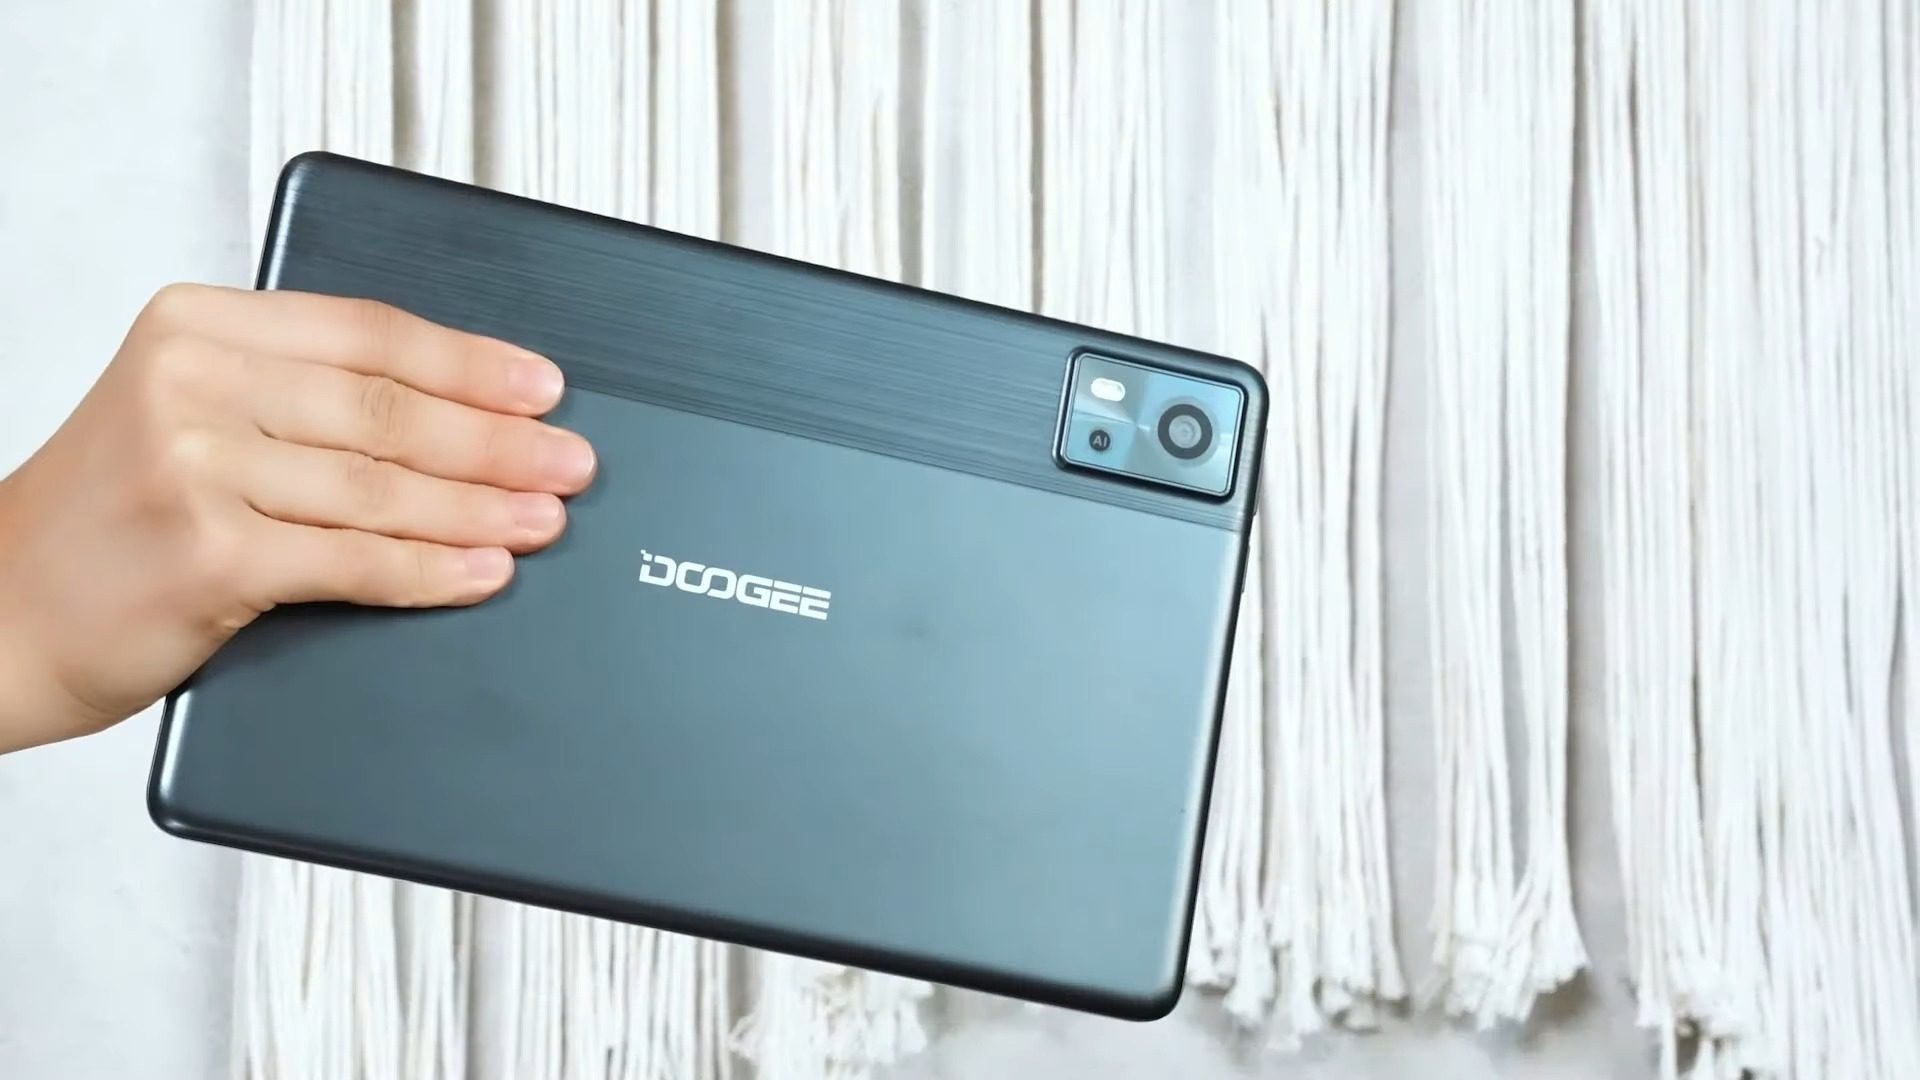 DOOGEE T10E Tablet: The Best budget choise for Students and Professionals